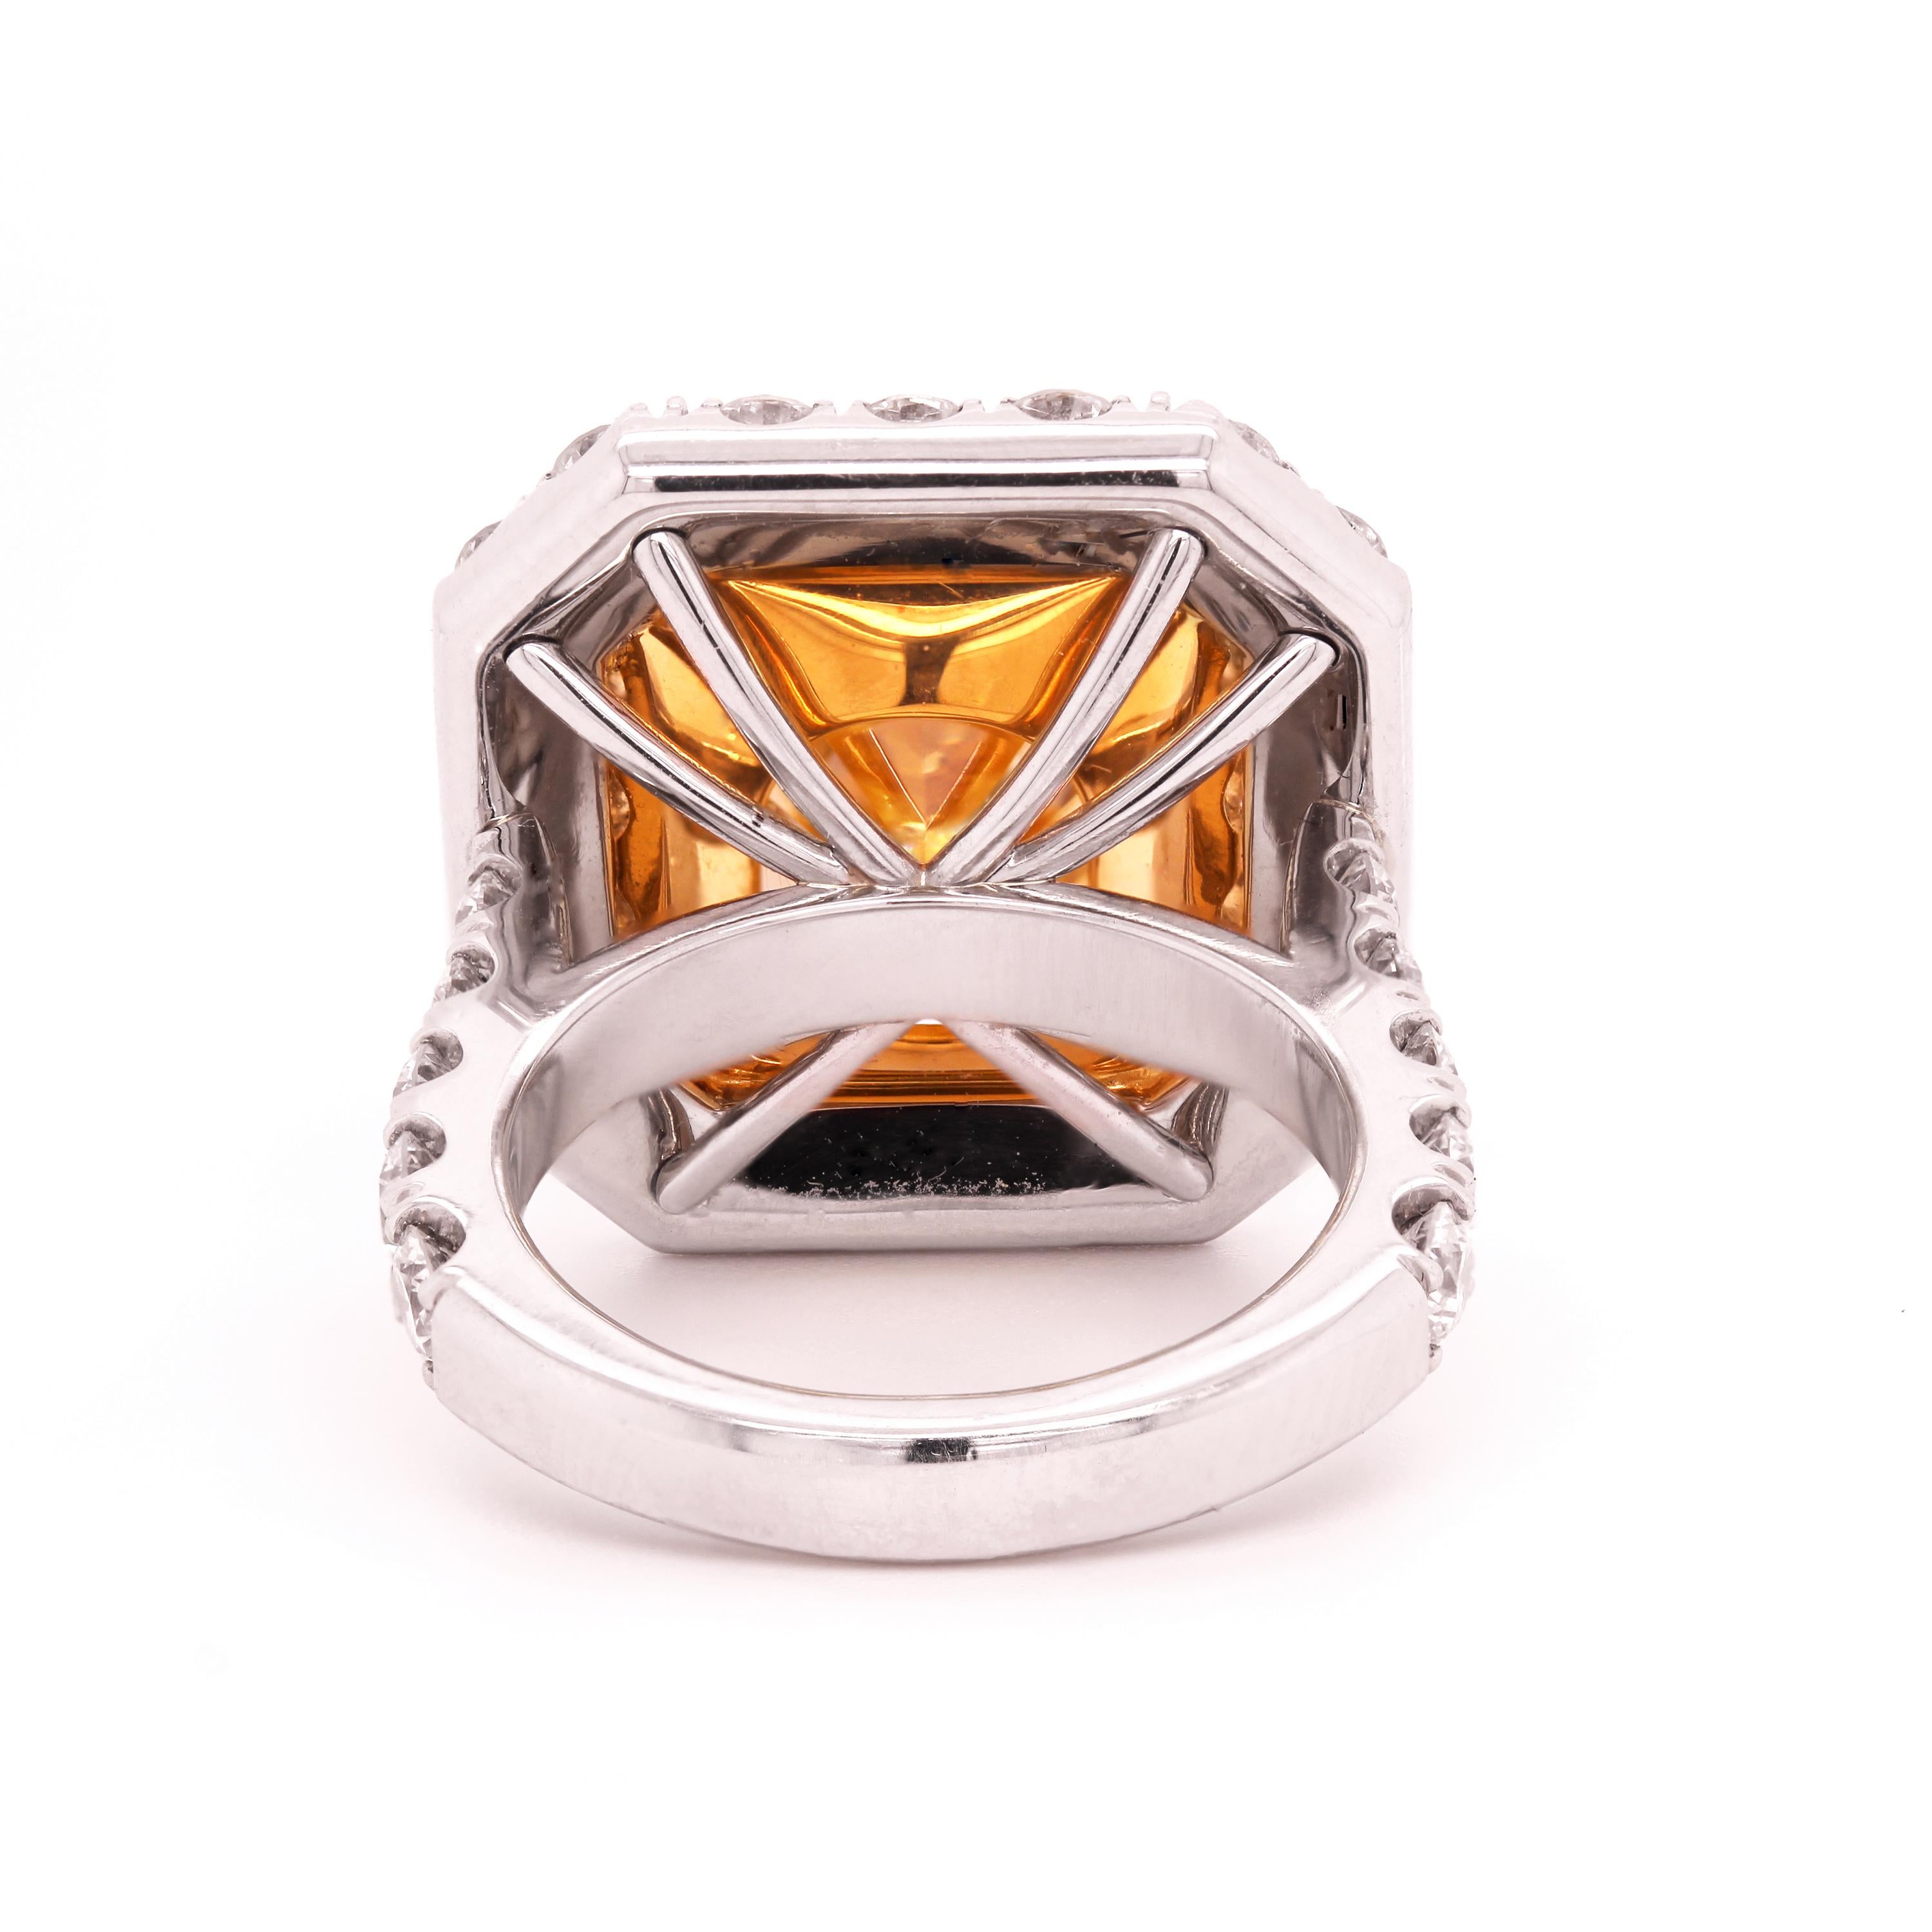 Radiant Cut GIA Certified 11.22 Carat Radiant Fancy Intense Yellow Diamond Ring For Sale